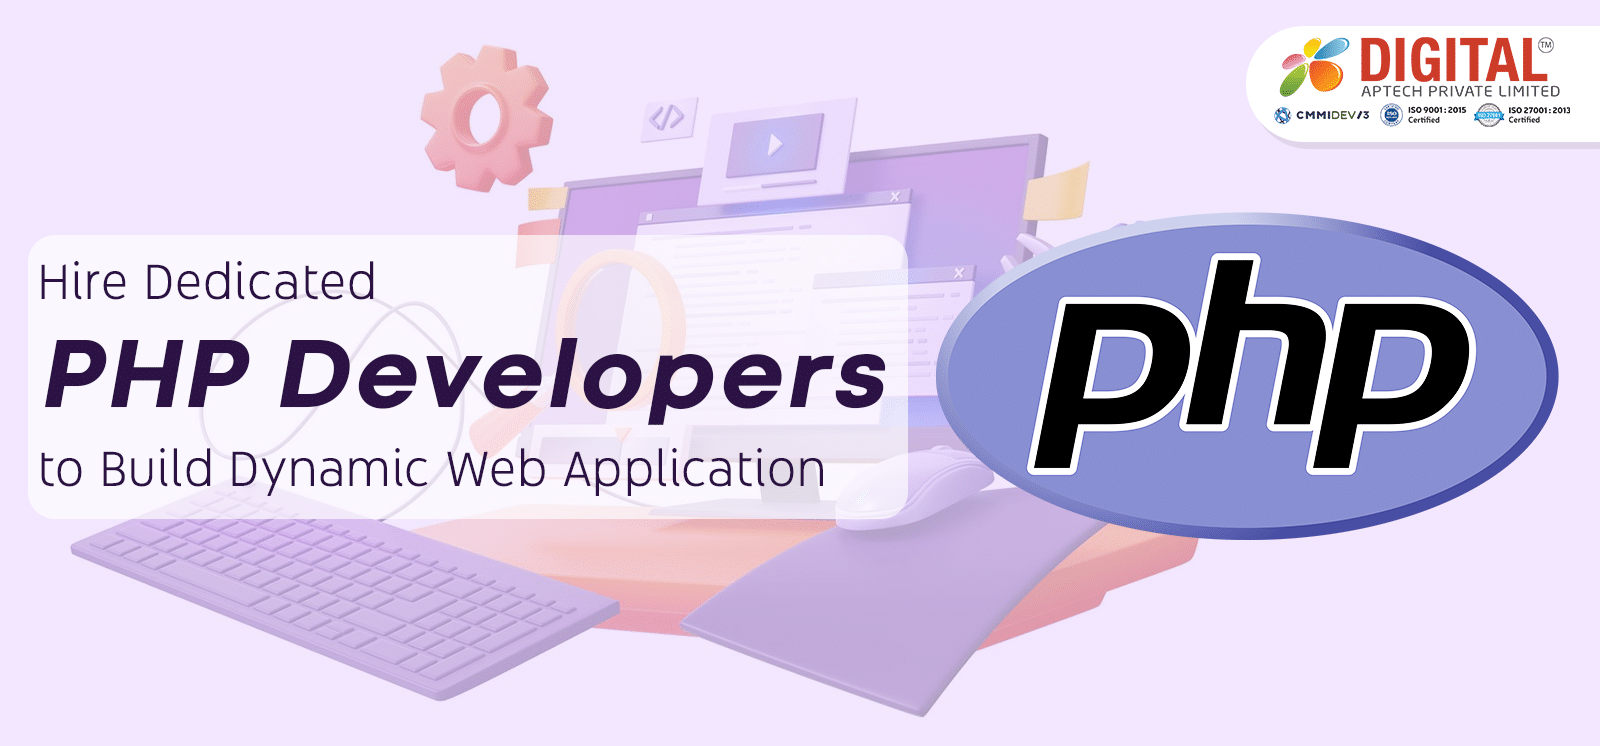 Hire Dedicated PHP Developers to Build Dynamic Web Applications